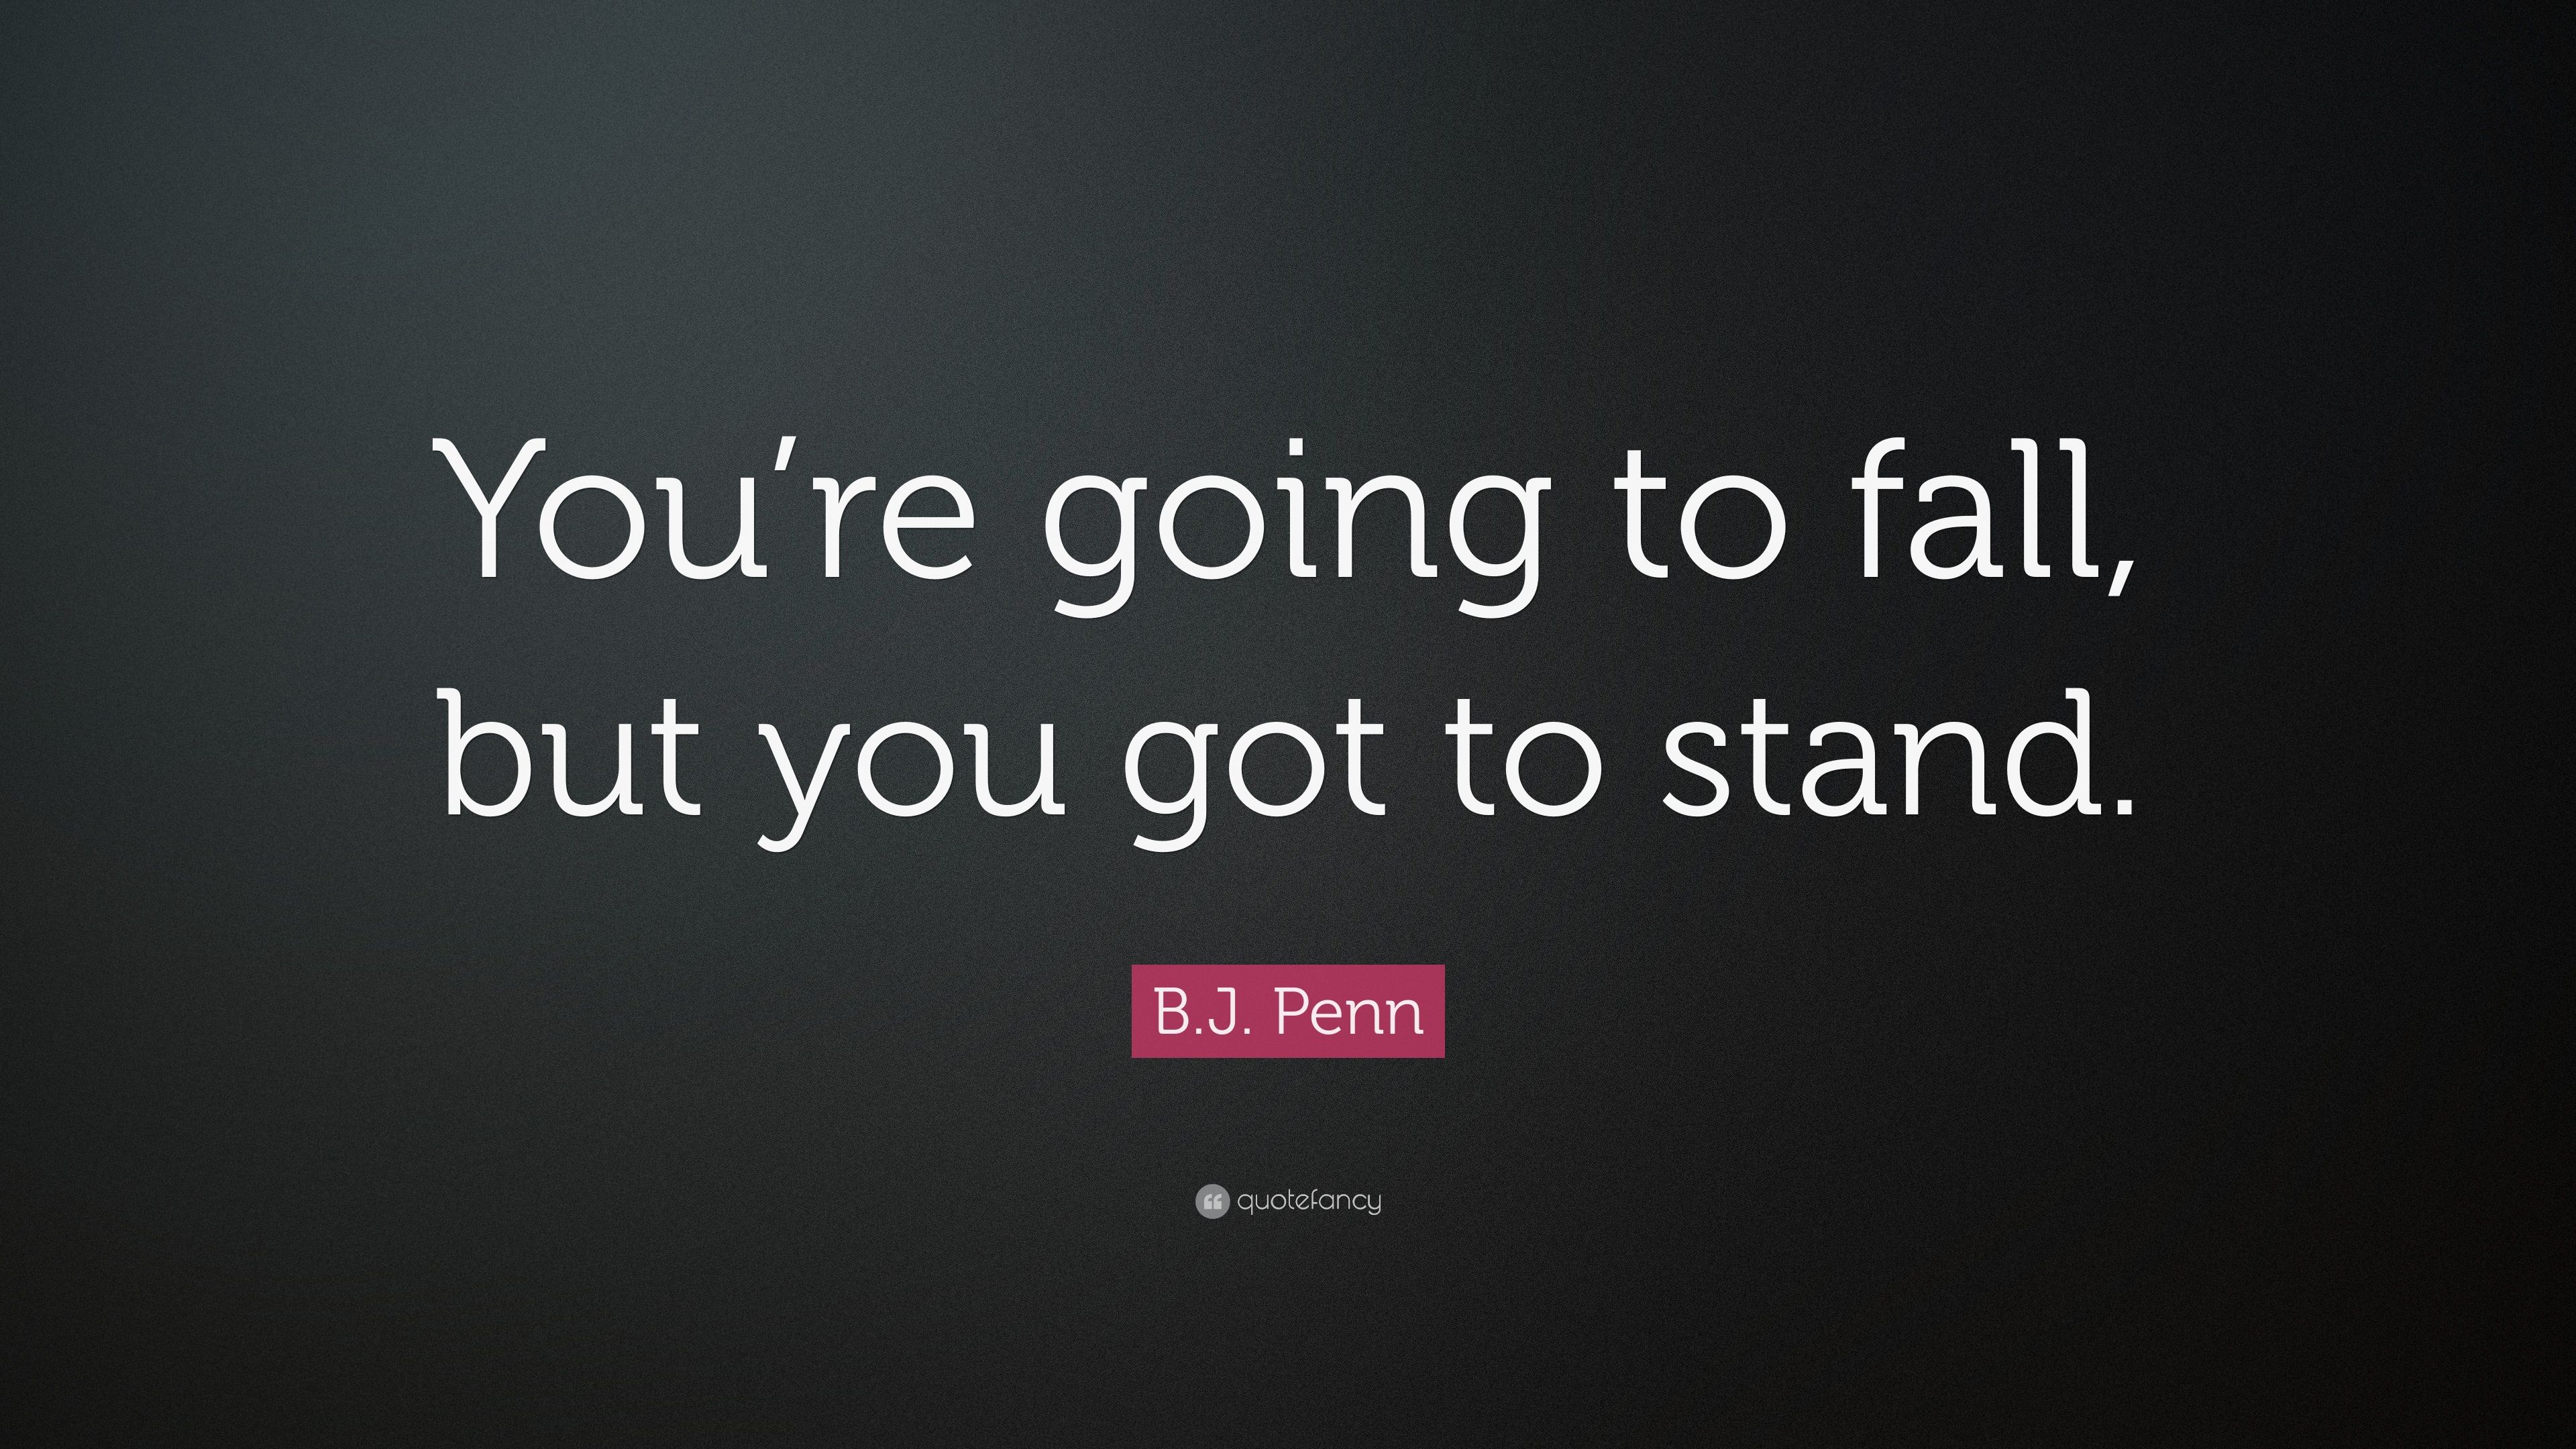 B.J. Penn Quote: “You're going to fall, but you got to stand.” 7